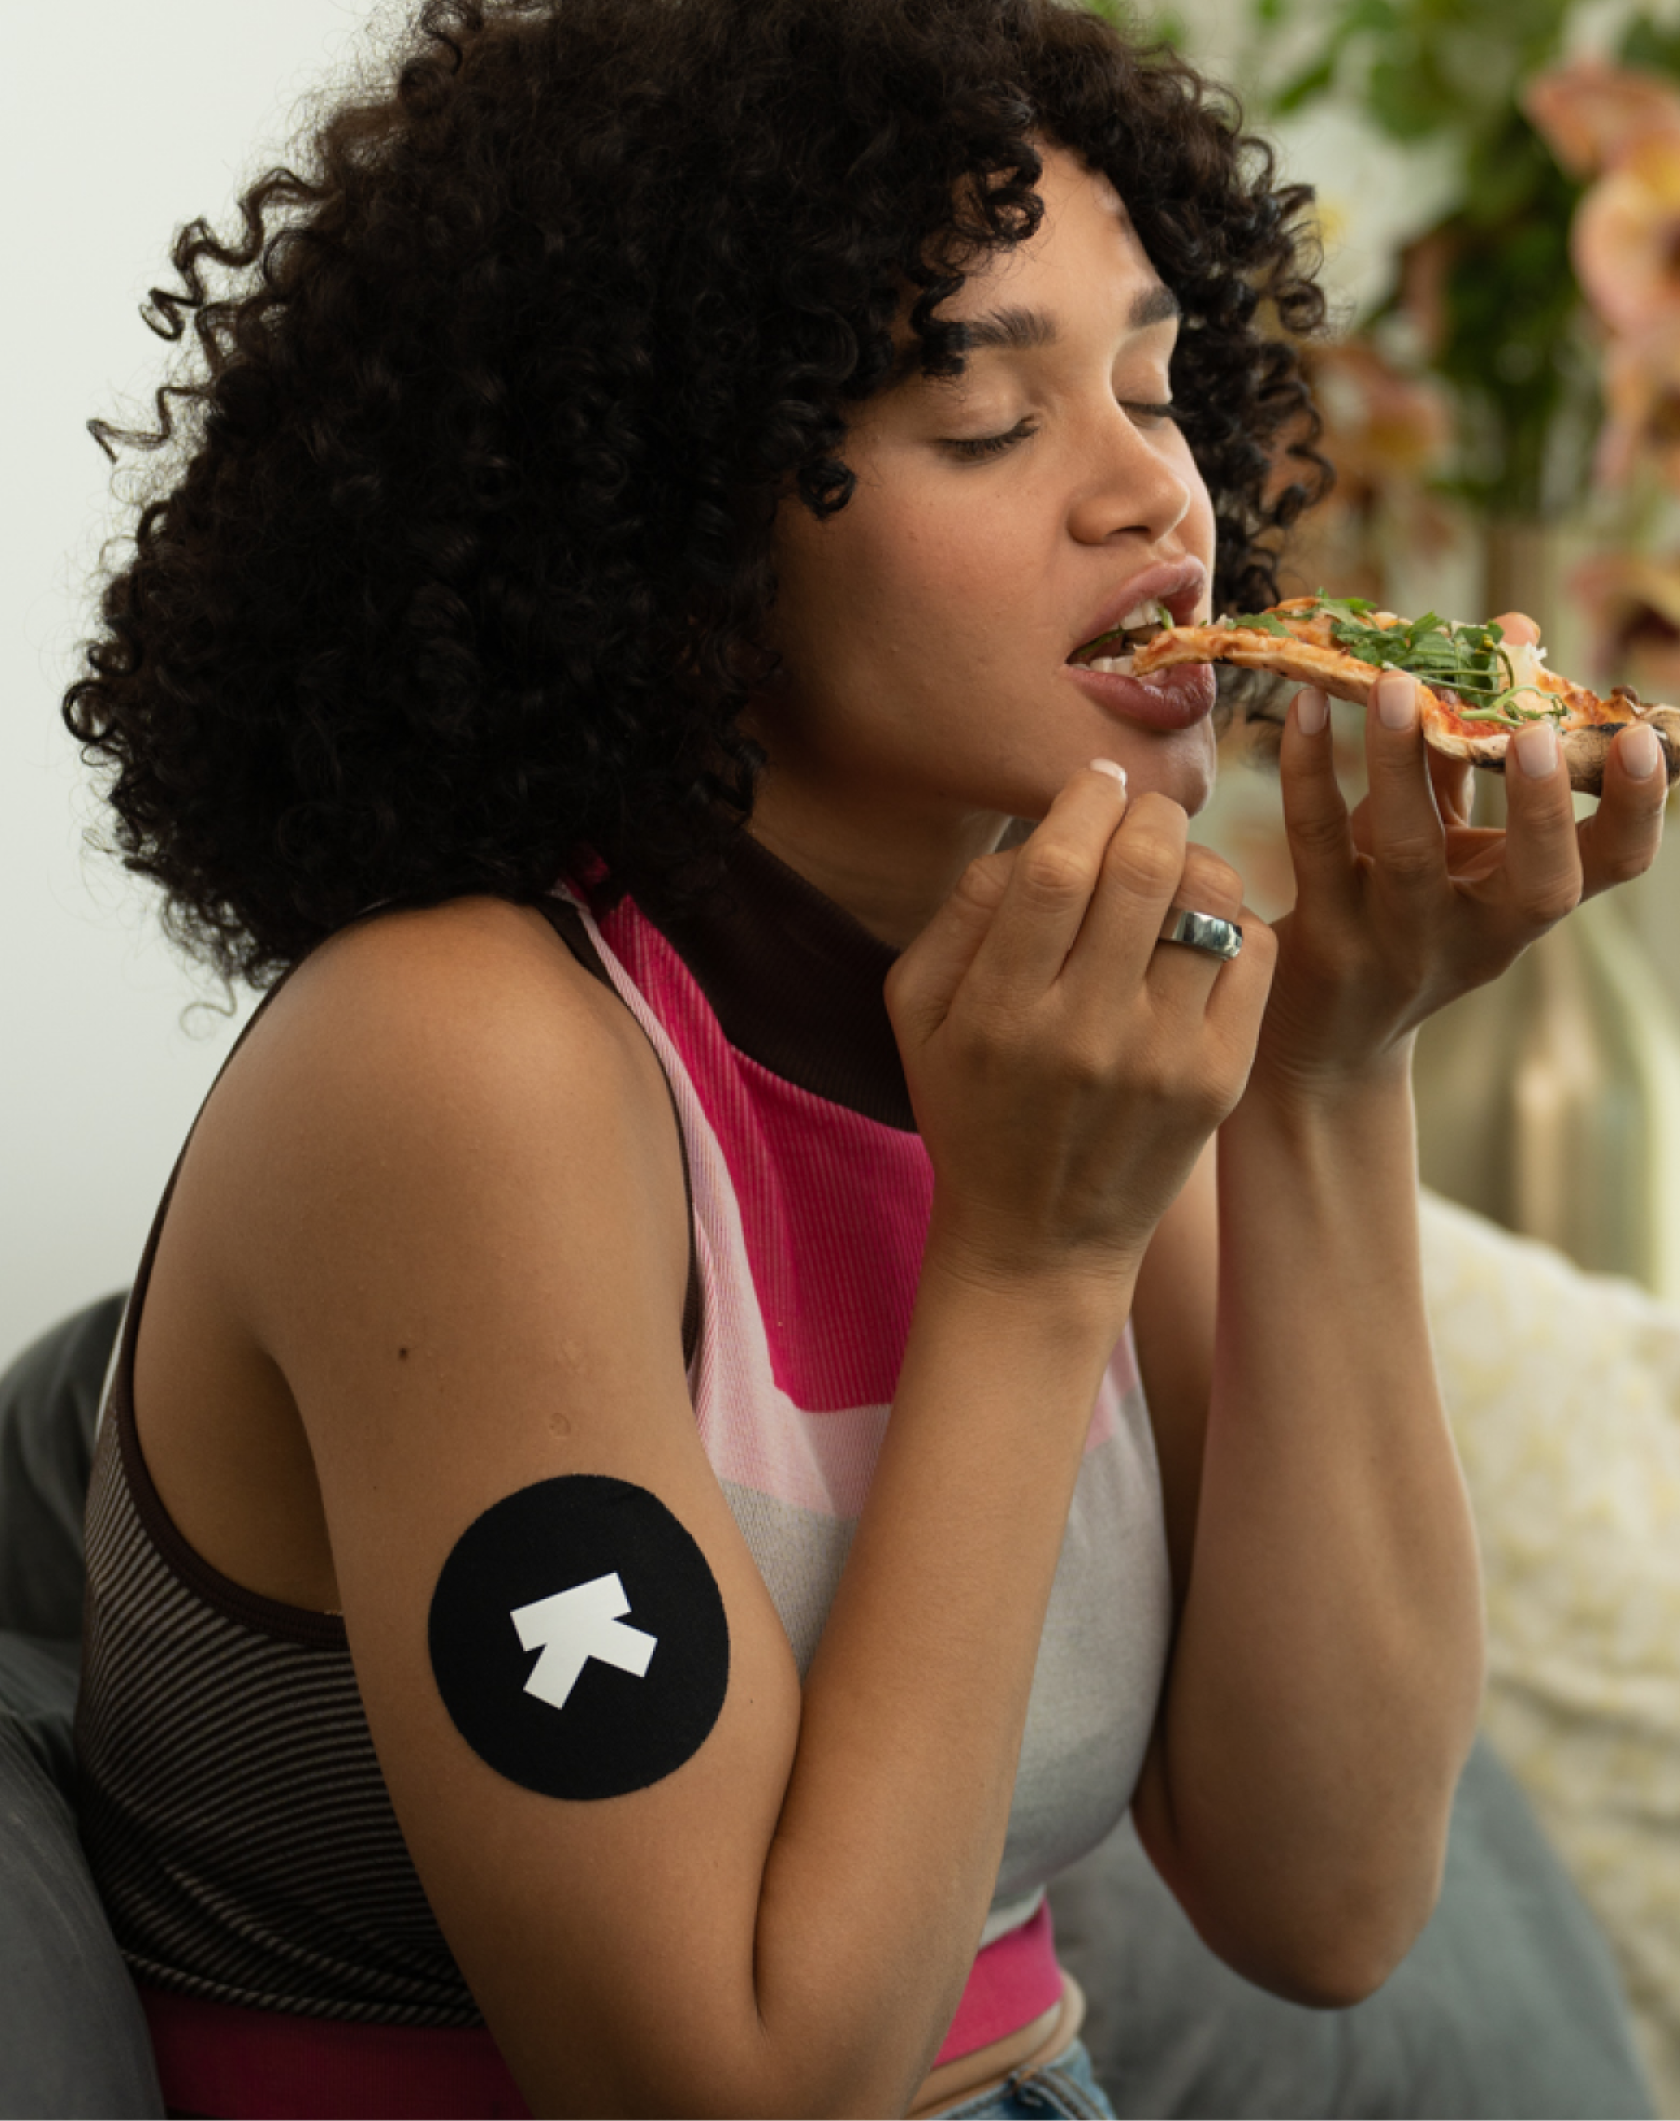 woman eating pizza with M1 applied to arm